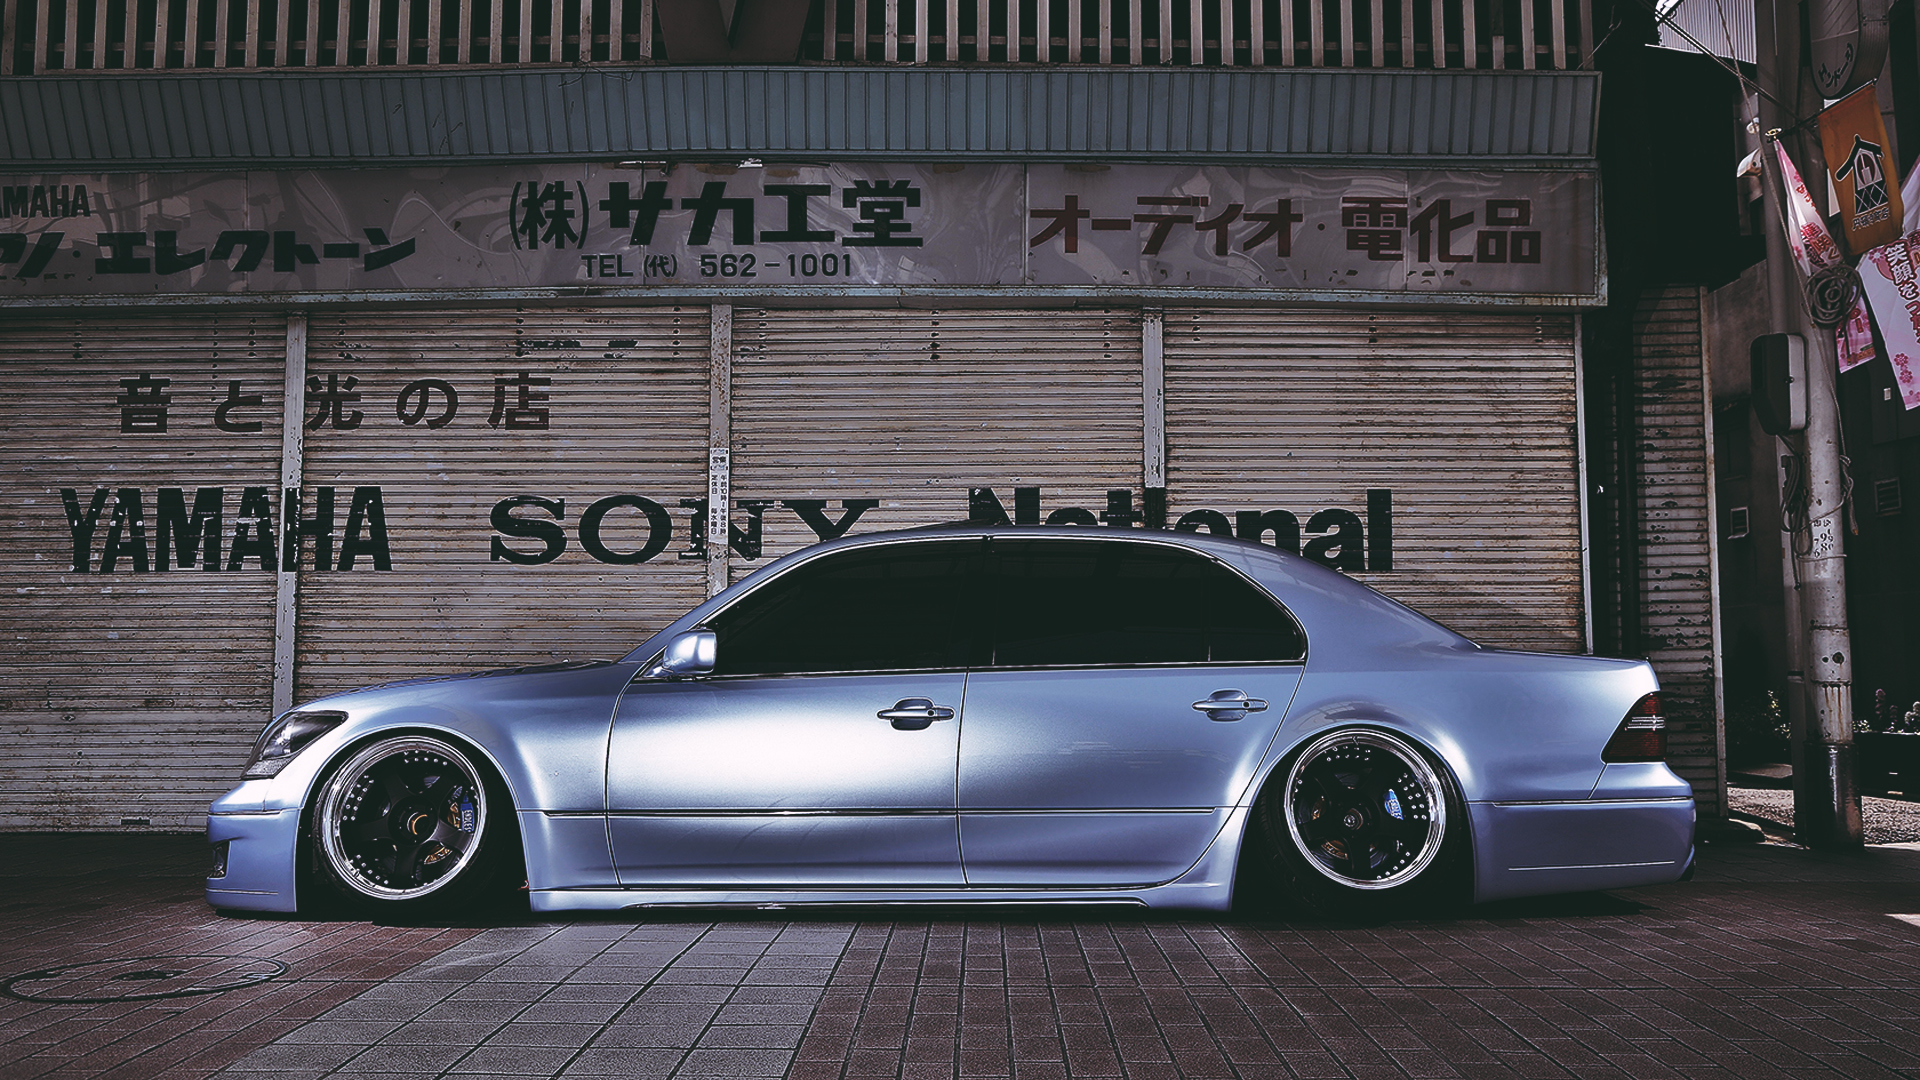 General 1920x1080 Lexus ls430 Toyota celsior car stanced Japanese cars side view vehicle store front Japanese